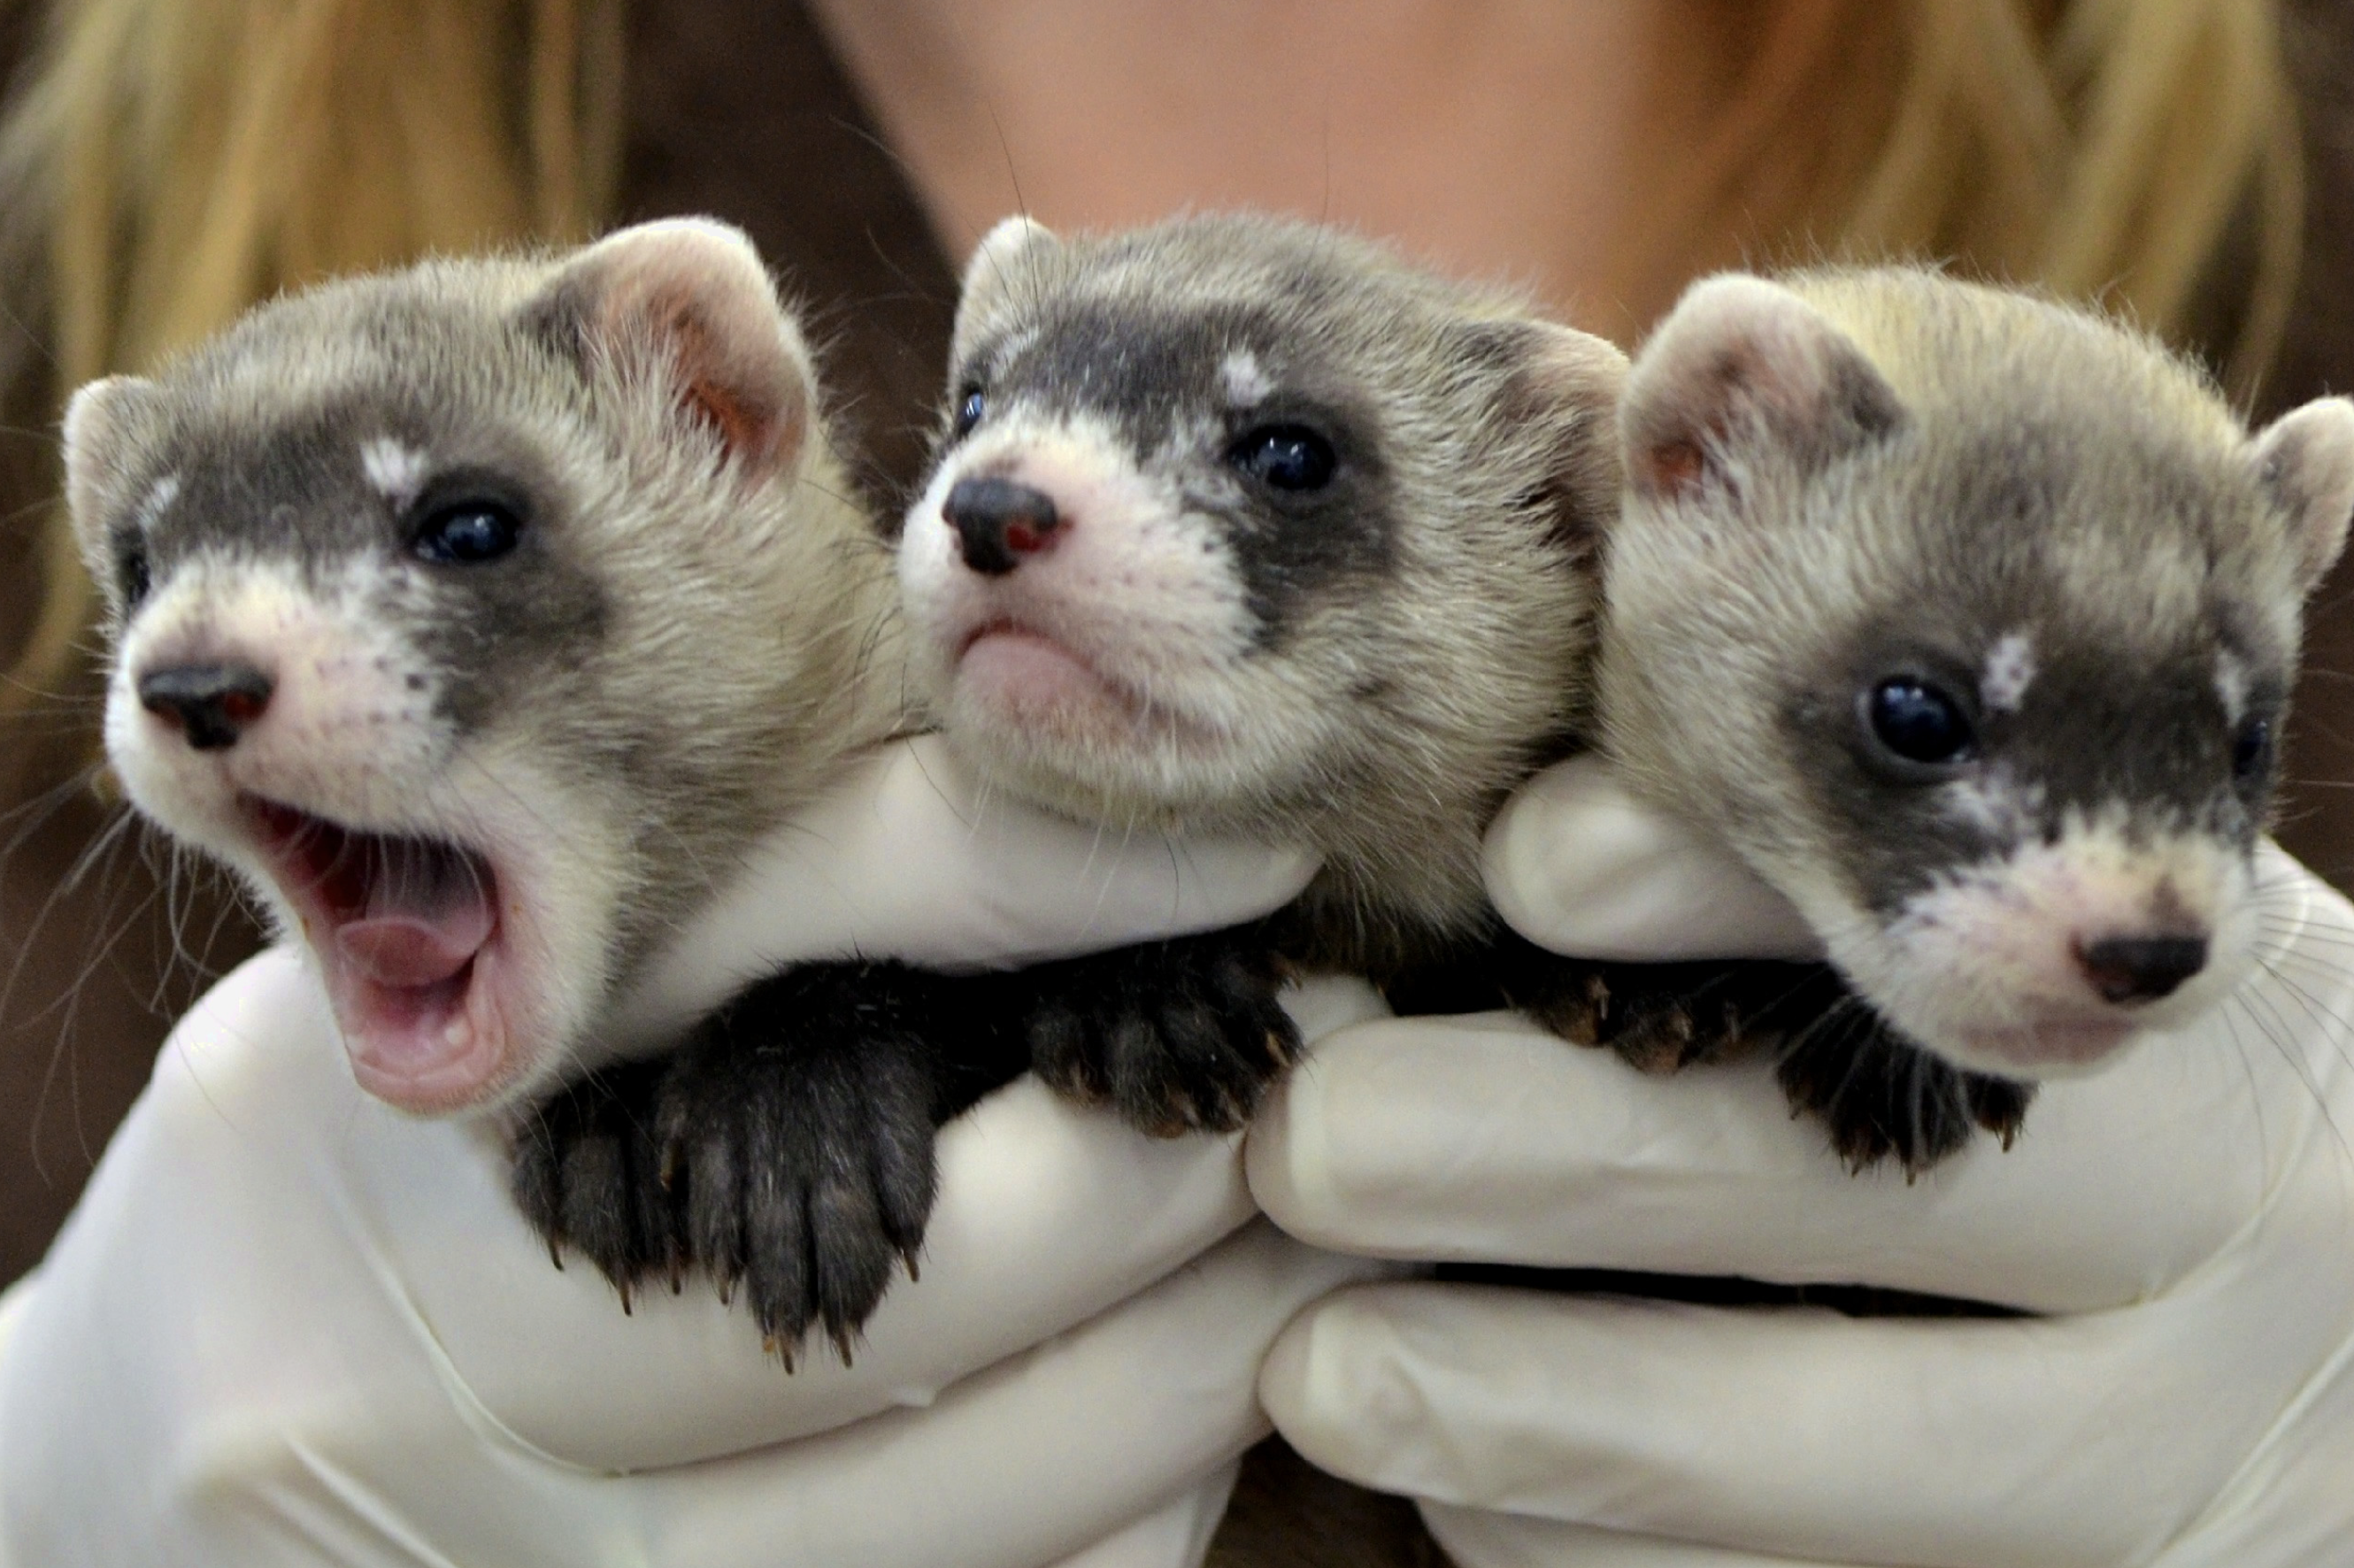 These black-footed ferret kits are being raised at the National Black-footed Ferret Conservation Center in Colorado so they can one day be reintroduced into the wild. Credit: Kimberly Fraser / USFWS